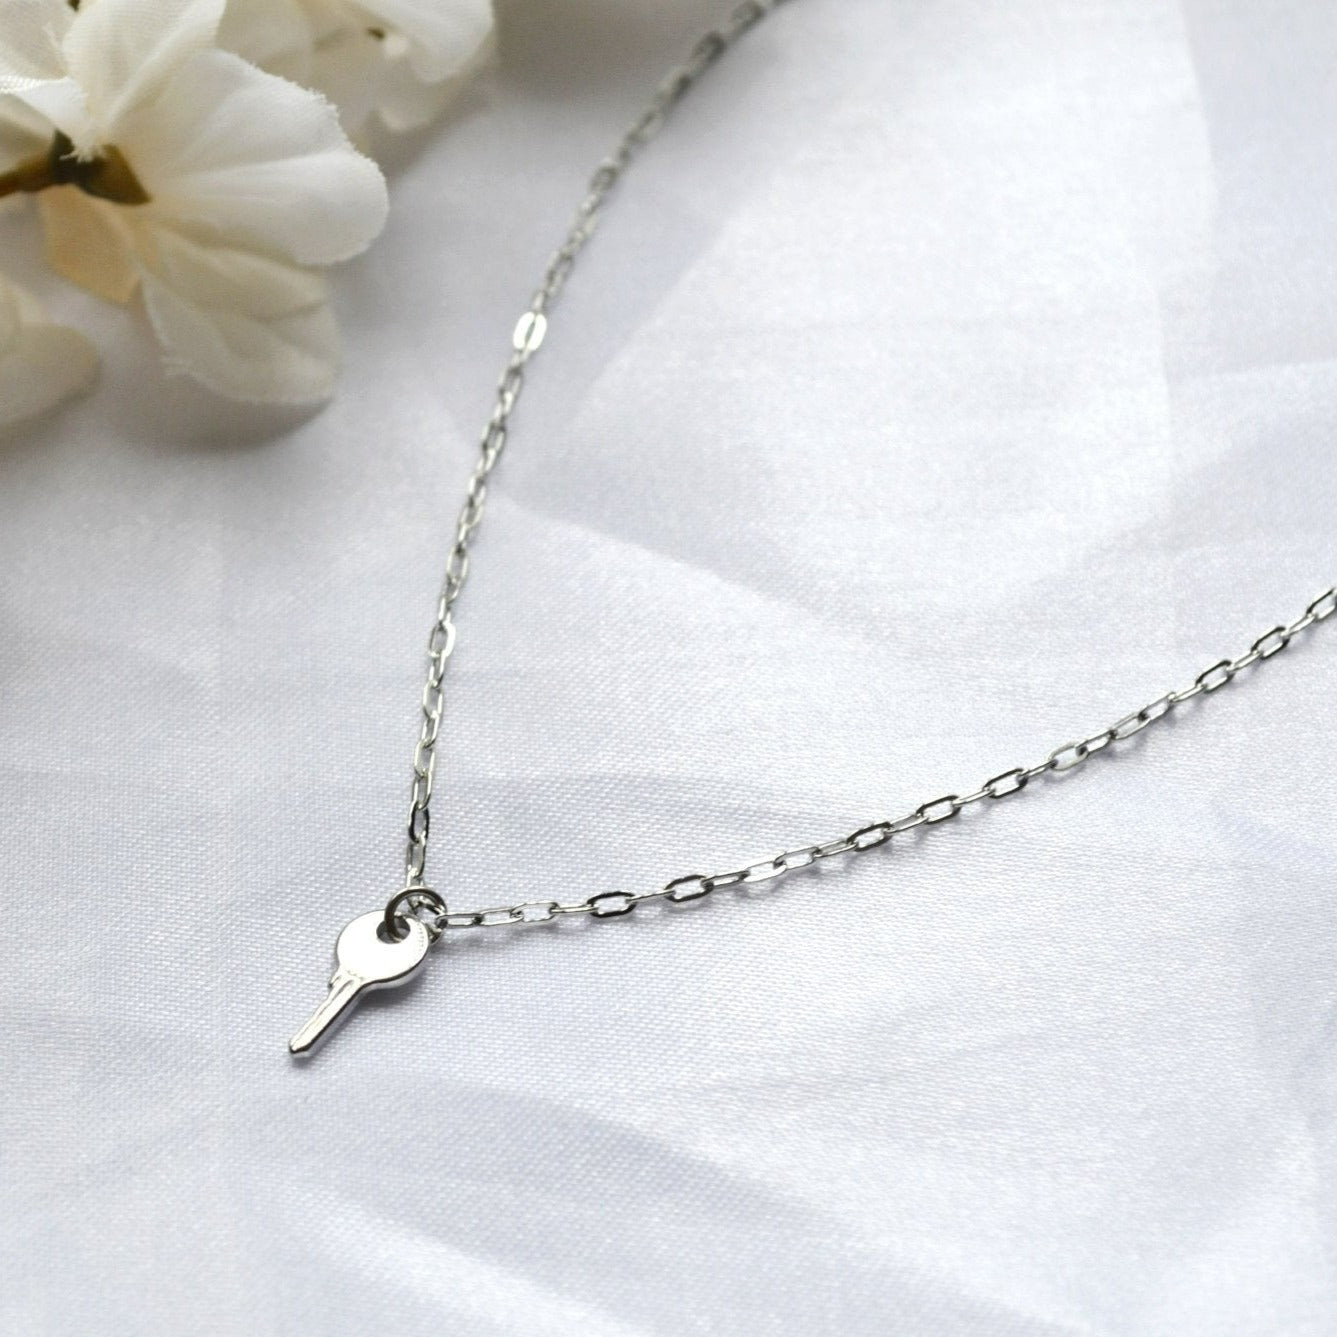 Dainty Silver or Gold Key Pendant Necklace Mini Paperclip Chain For Women